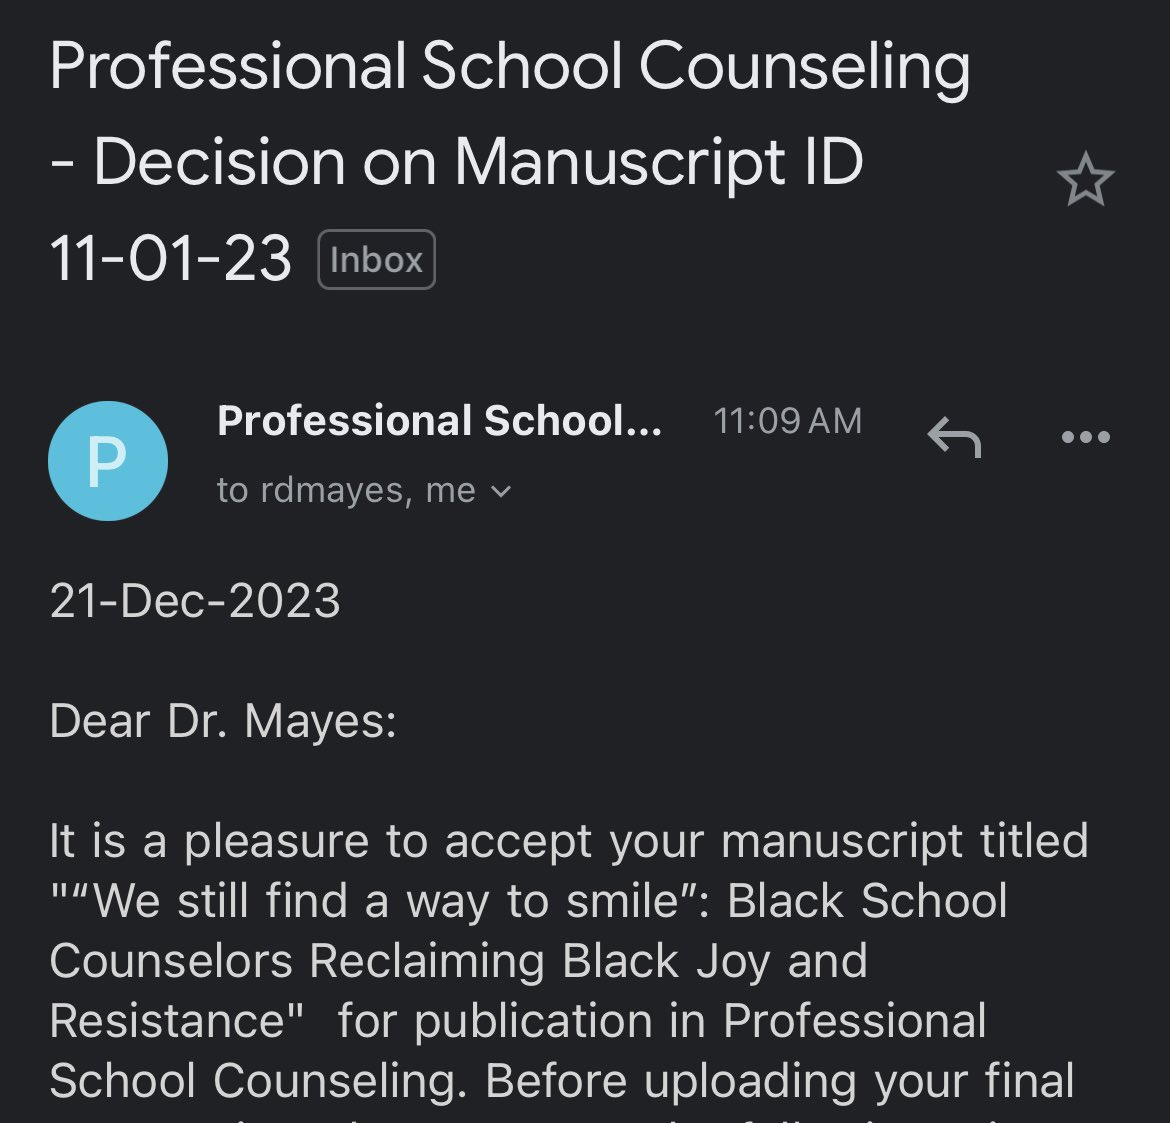 Beyond excited about this acceptance as the focus is on Black #SchoolCounselors and #BlackJoy !!! So much knowledge , wisdom, and expertise on display from the participants 🤩 #AntiracistSC